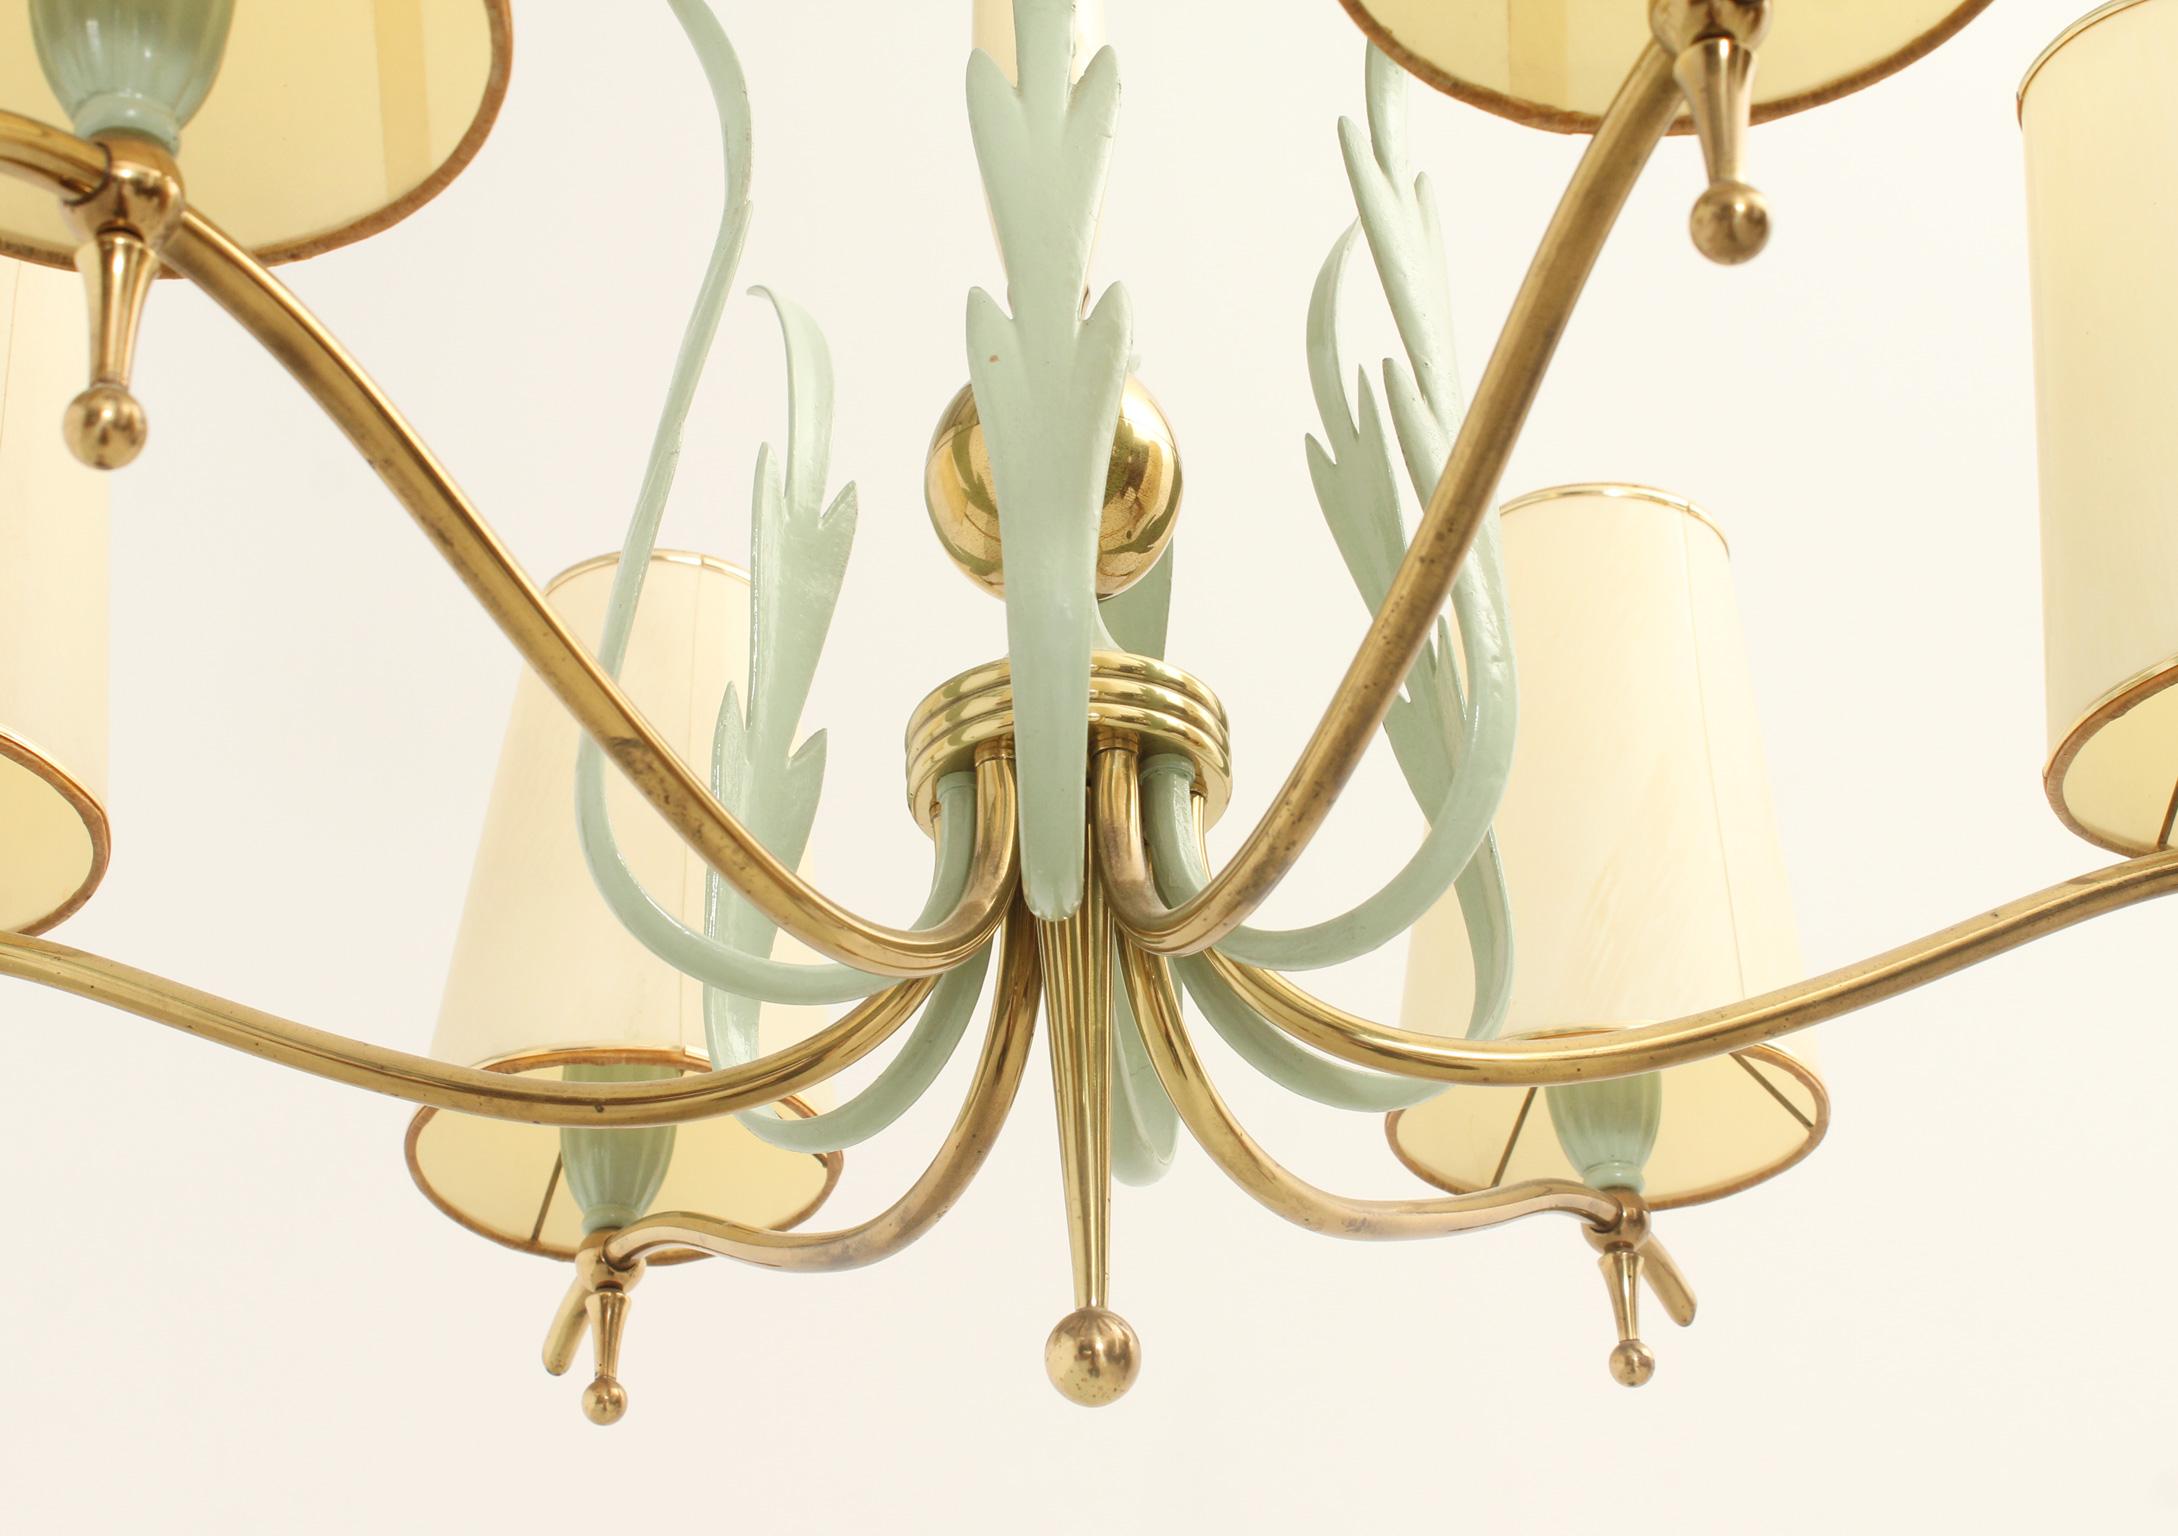 Pendant Lamp with Six Arms by Stilnovo, Italy, 1940's For Sale 3